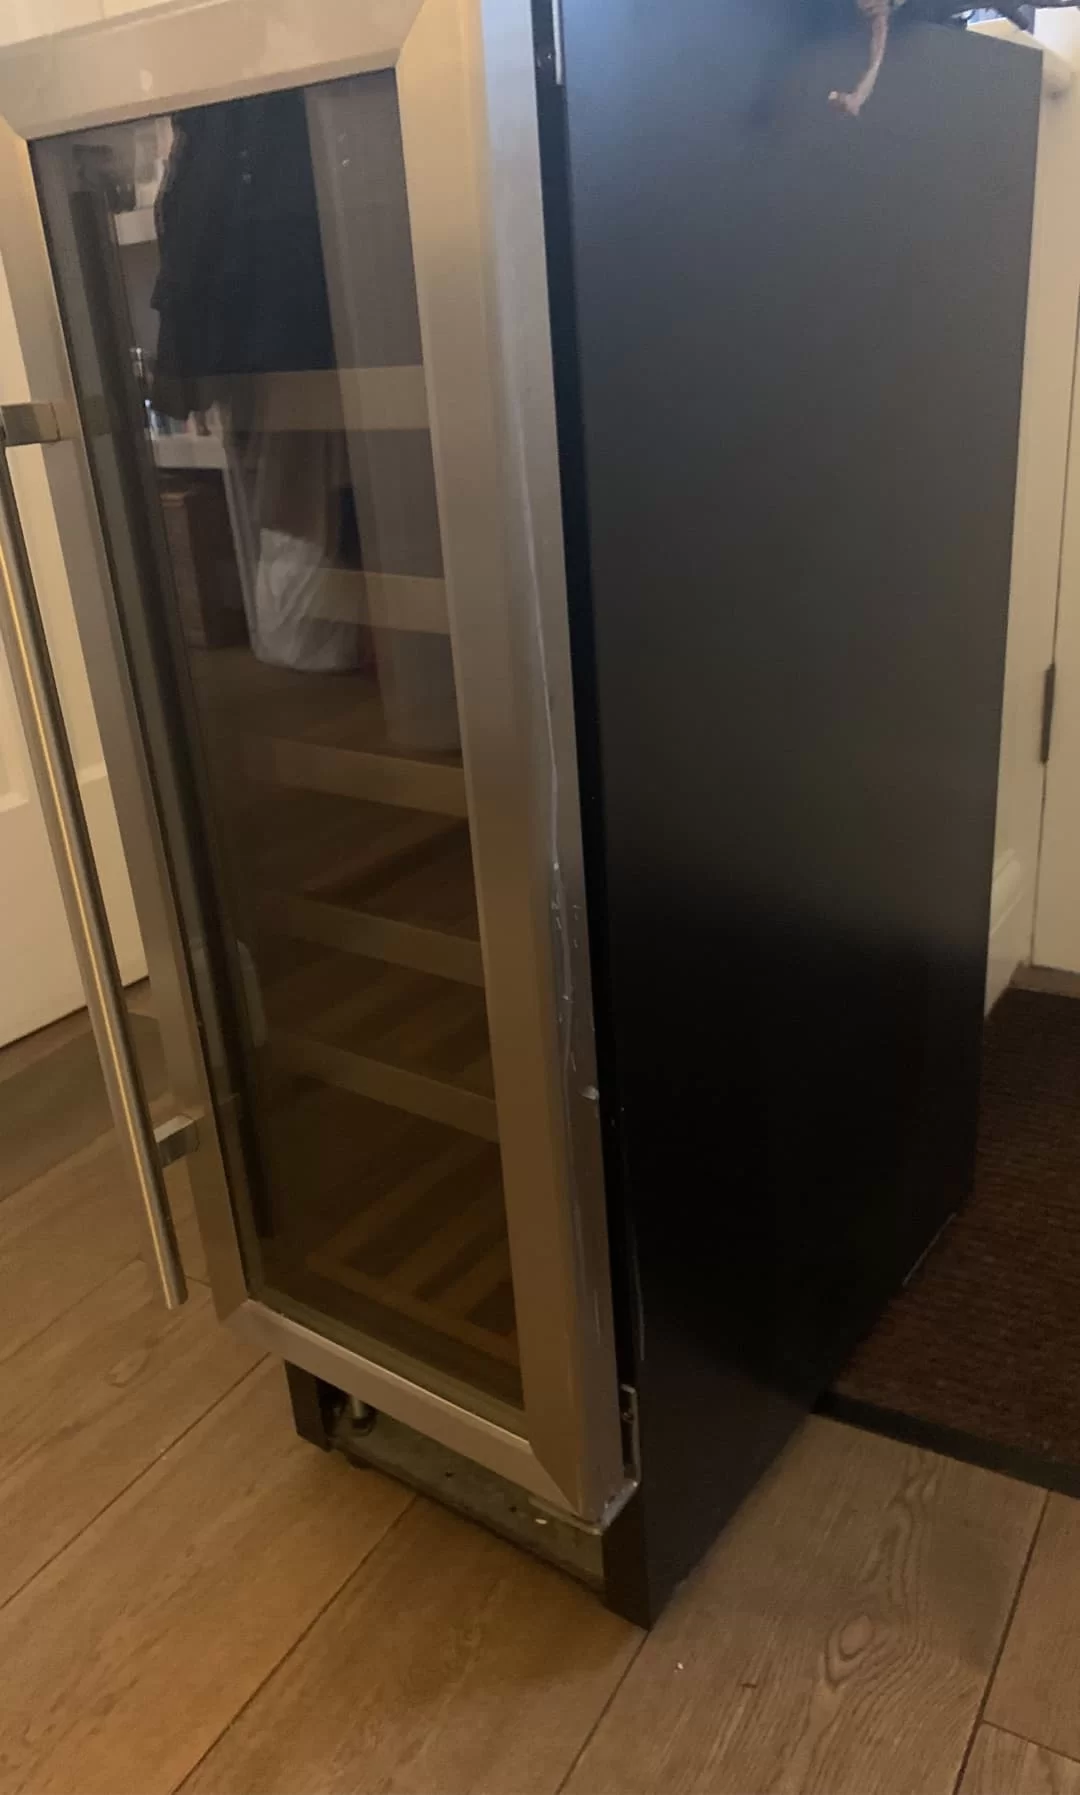 wine fridge for the total price of £60